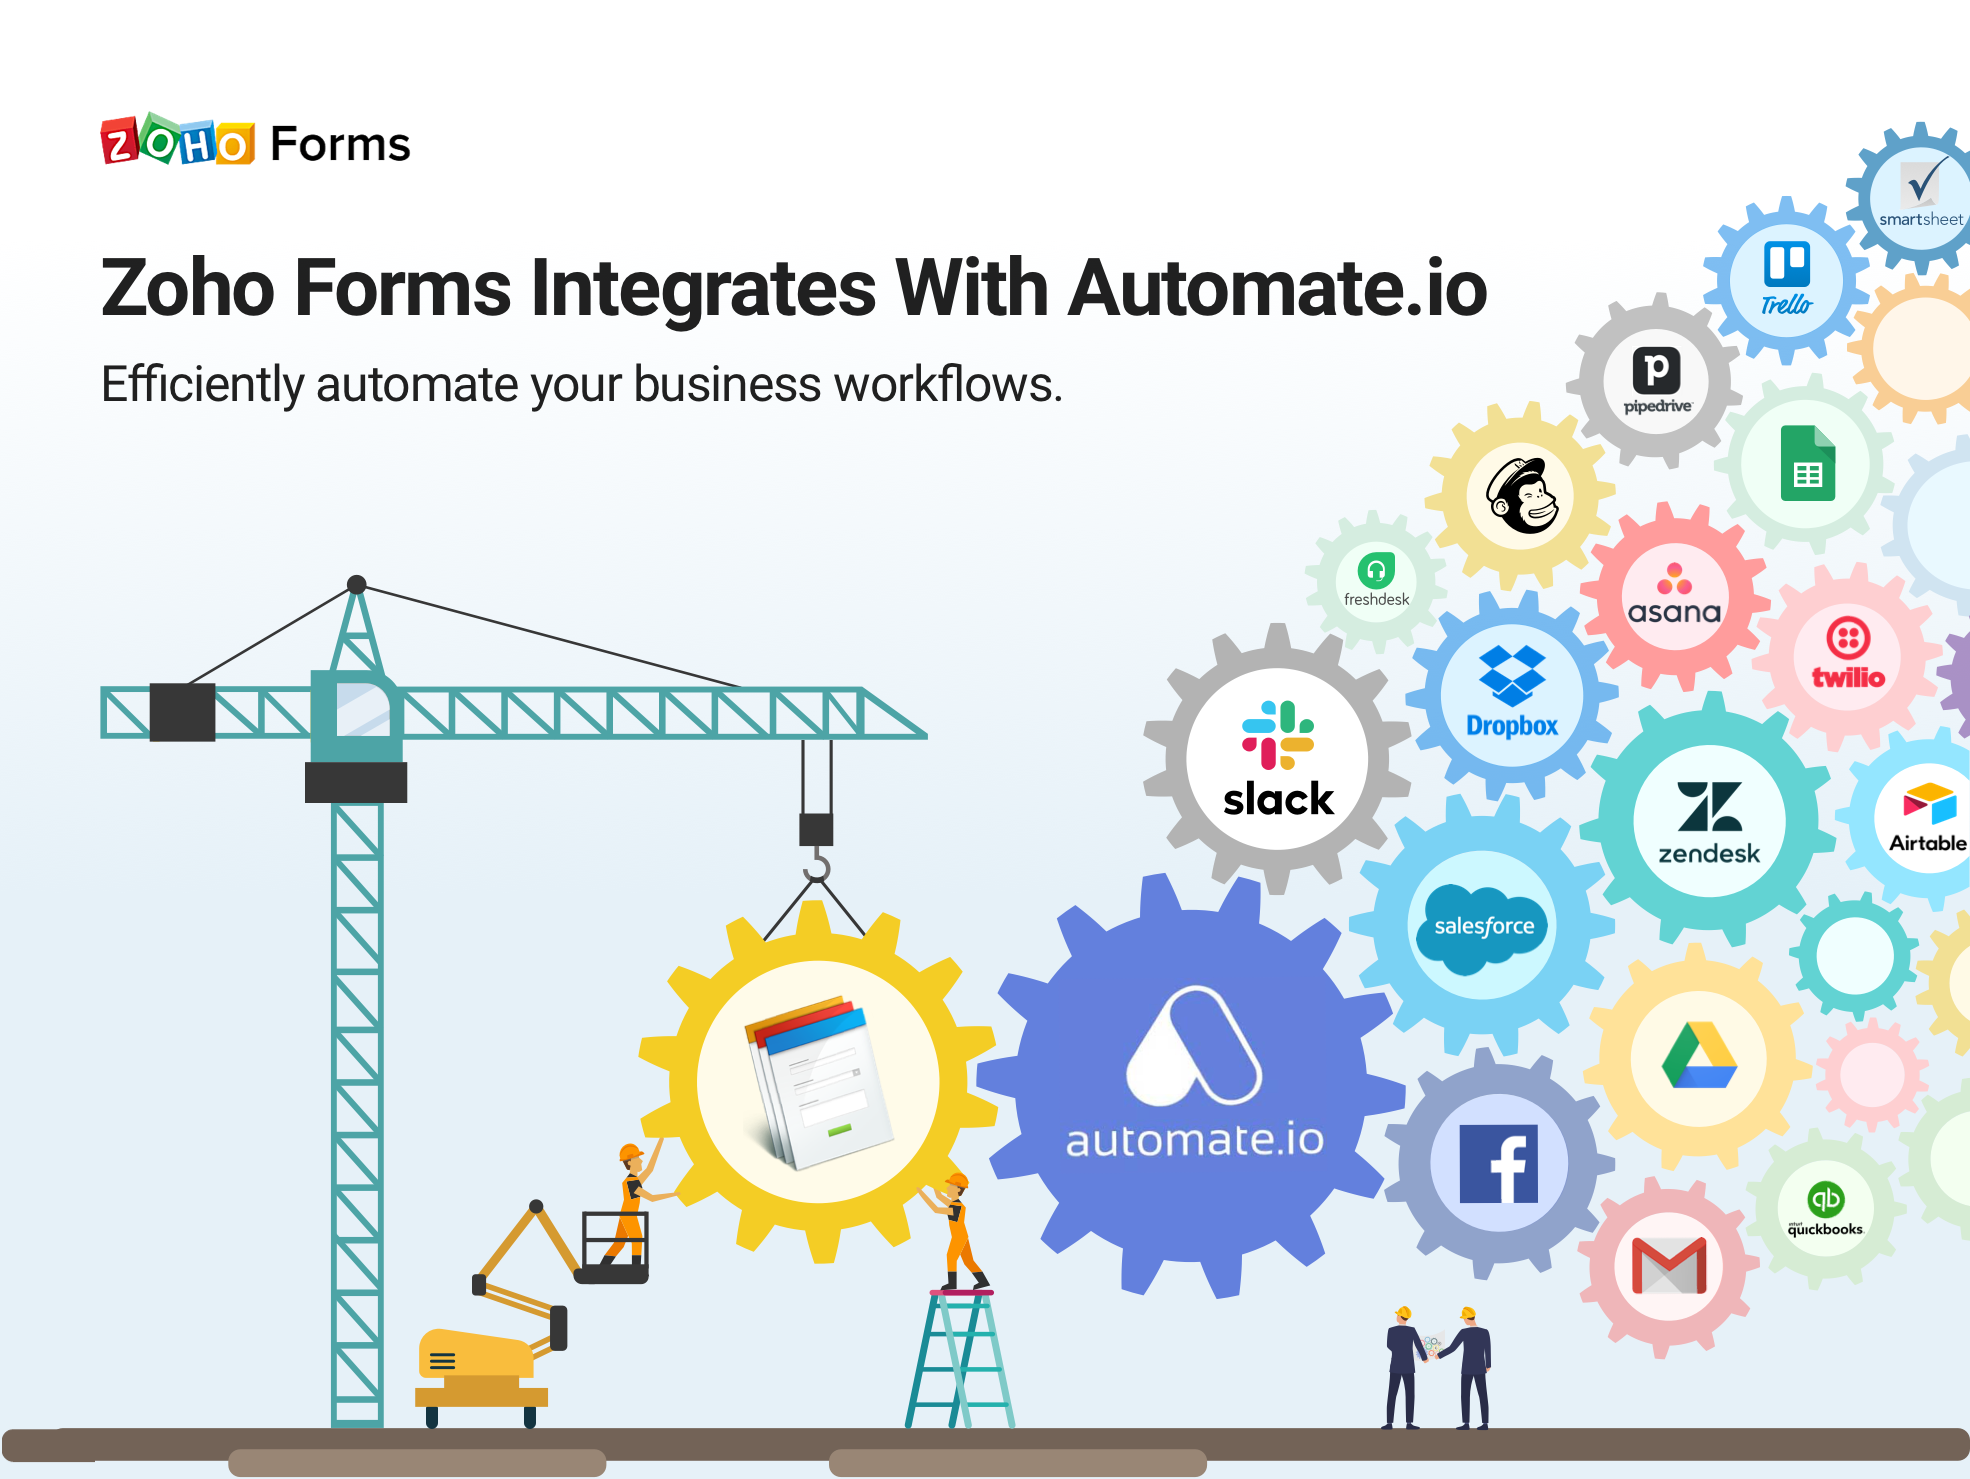 Enhance Your Productivity with the Zoho Forms-Automate.io Integration